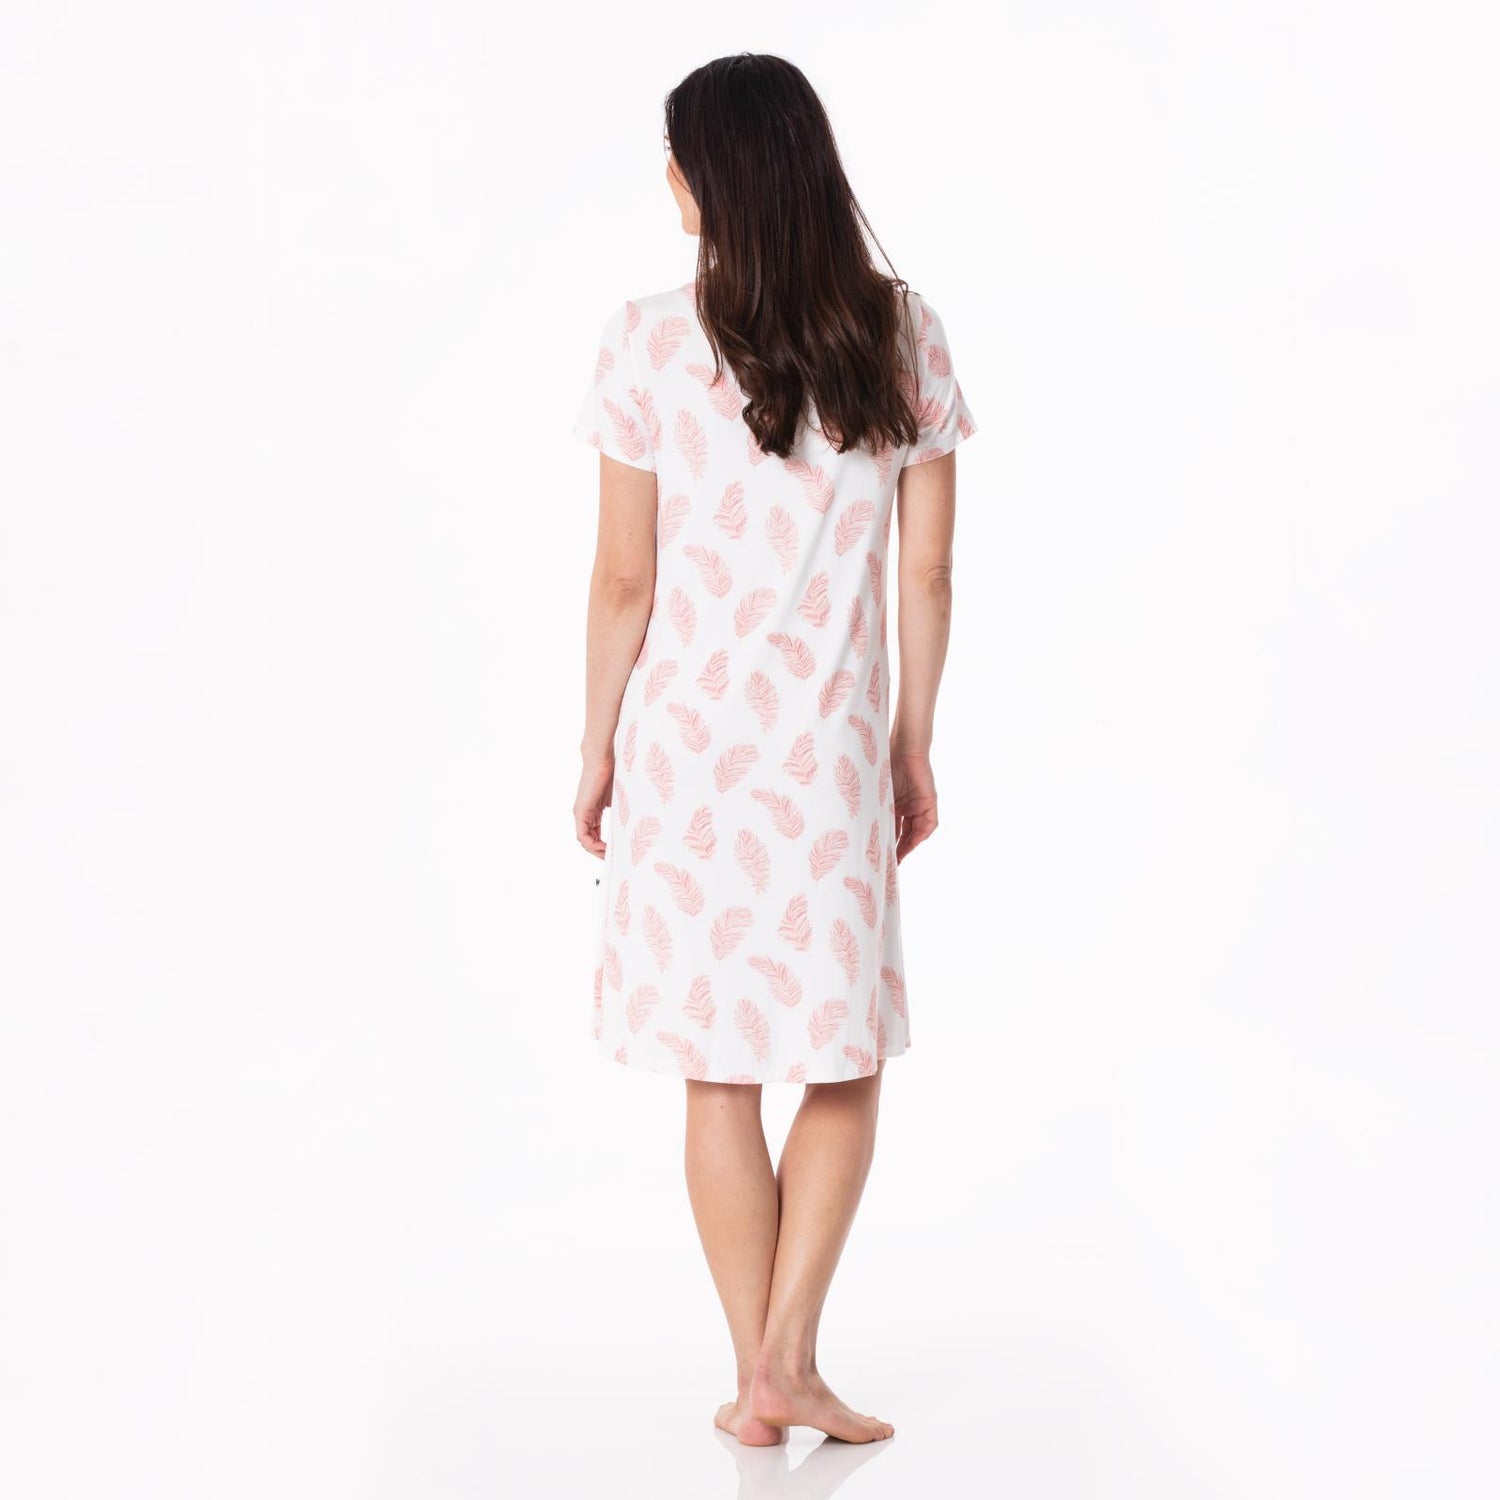 Women's Print Nursing Nightgown in Natural Feathers